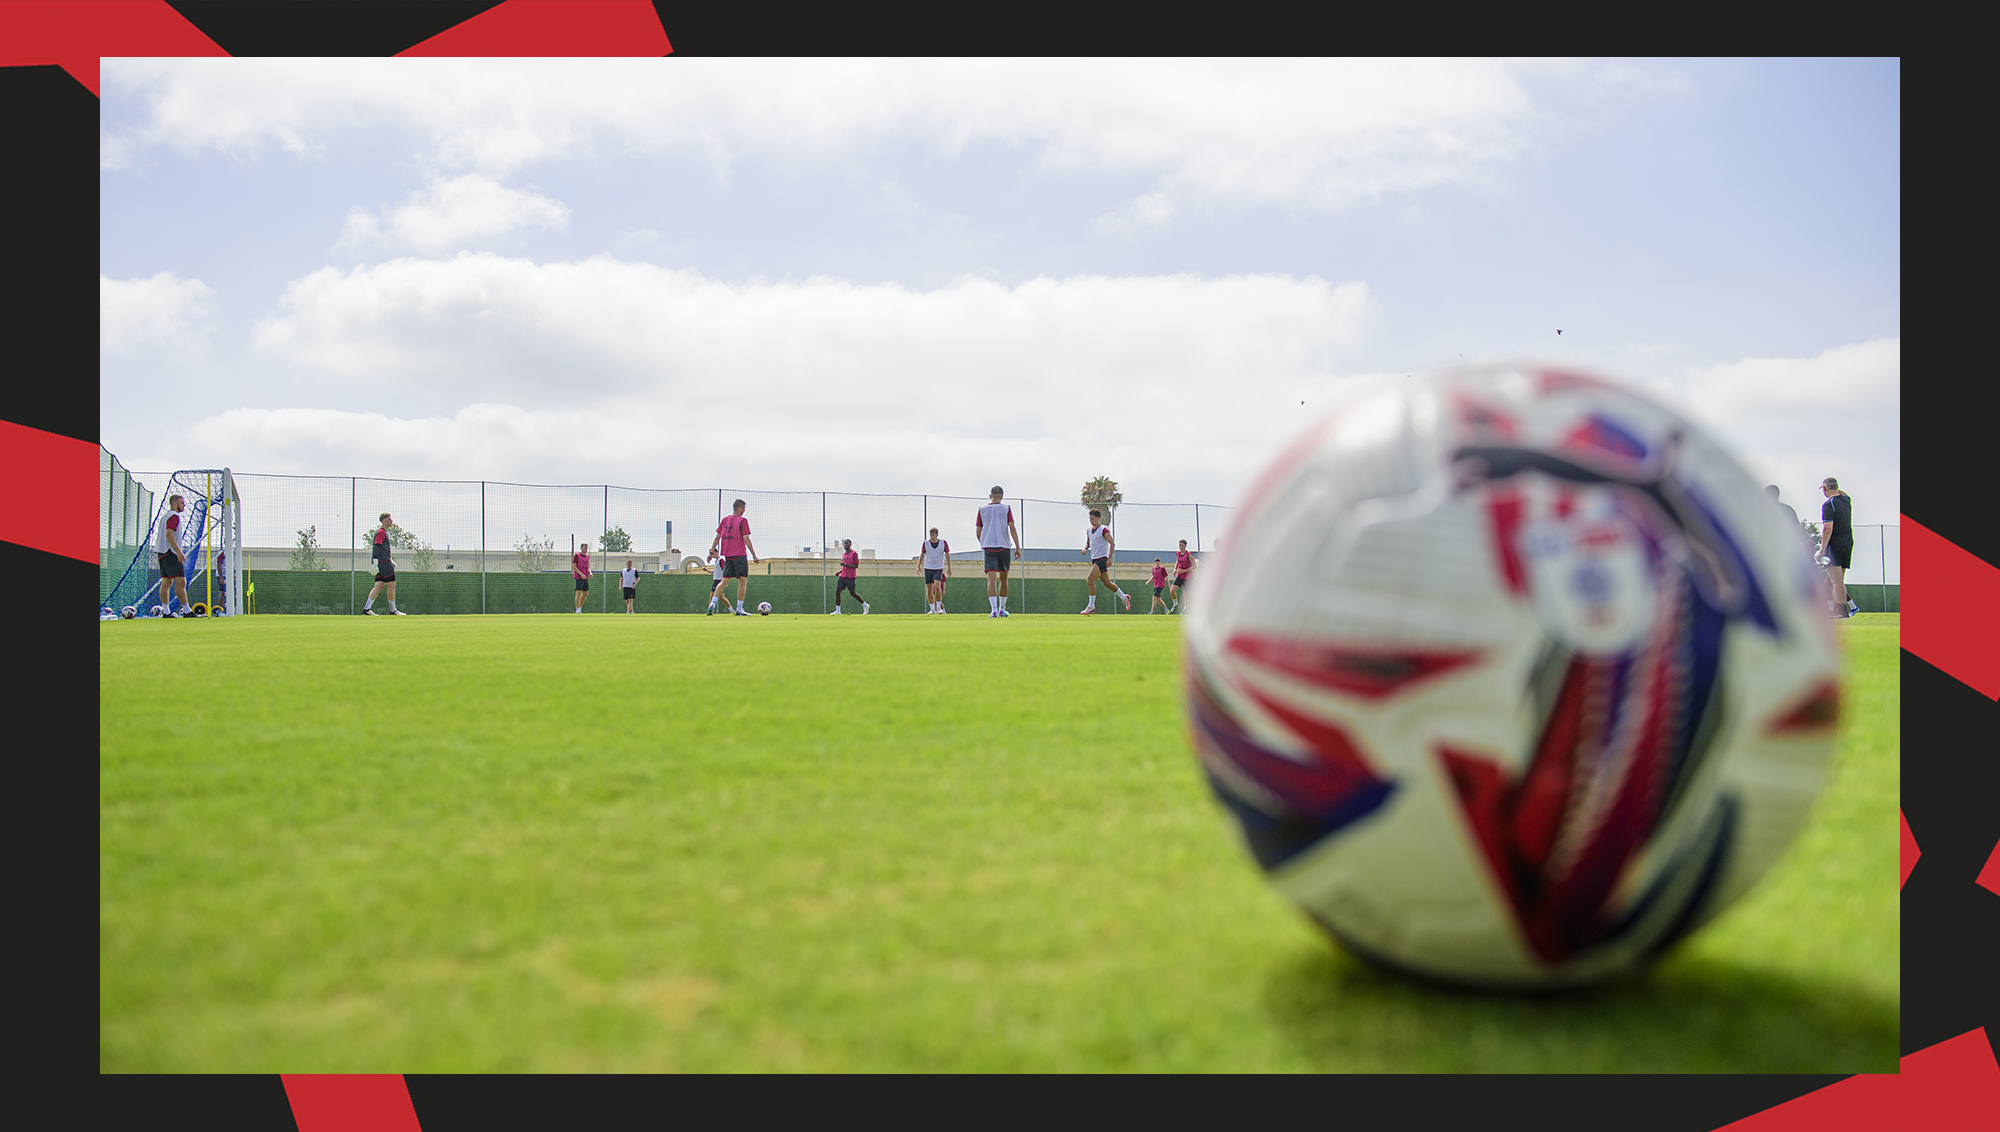 A football is pictured as Lincoln City's players are training in the background.